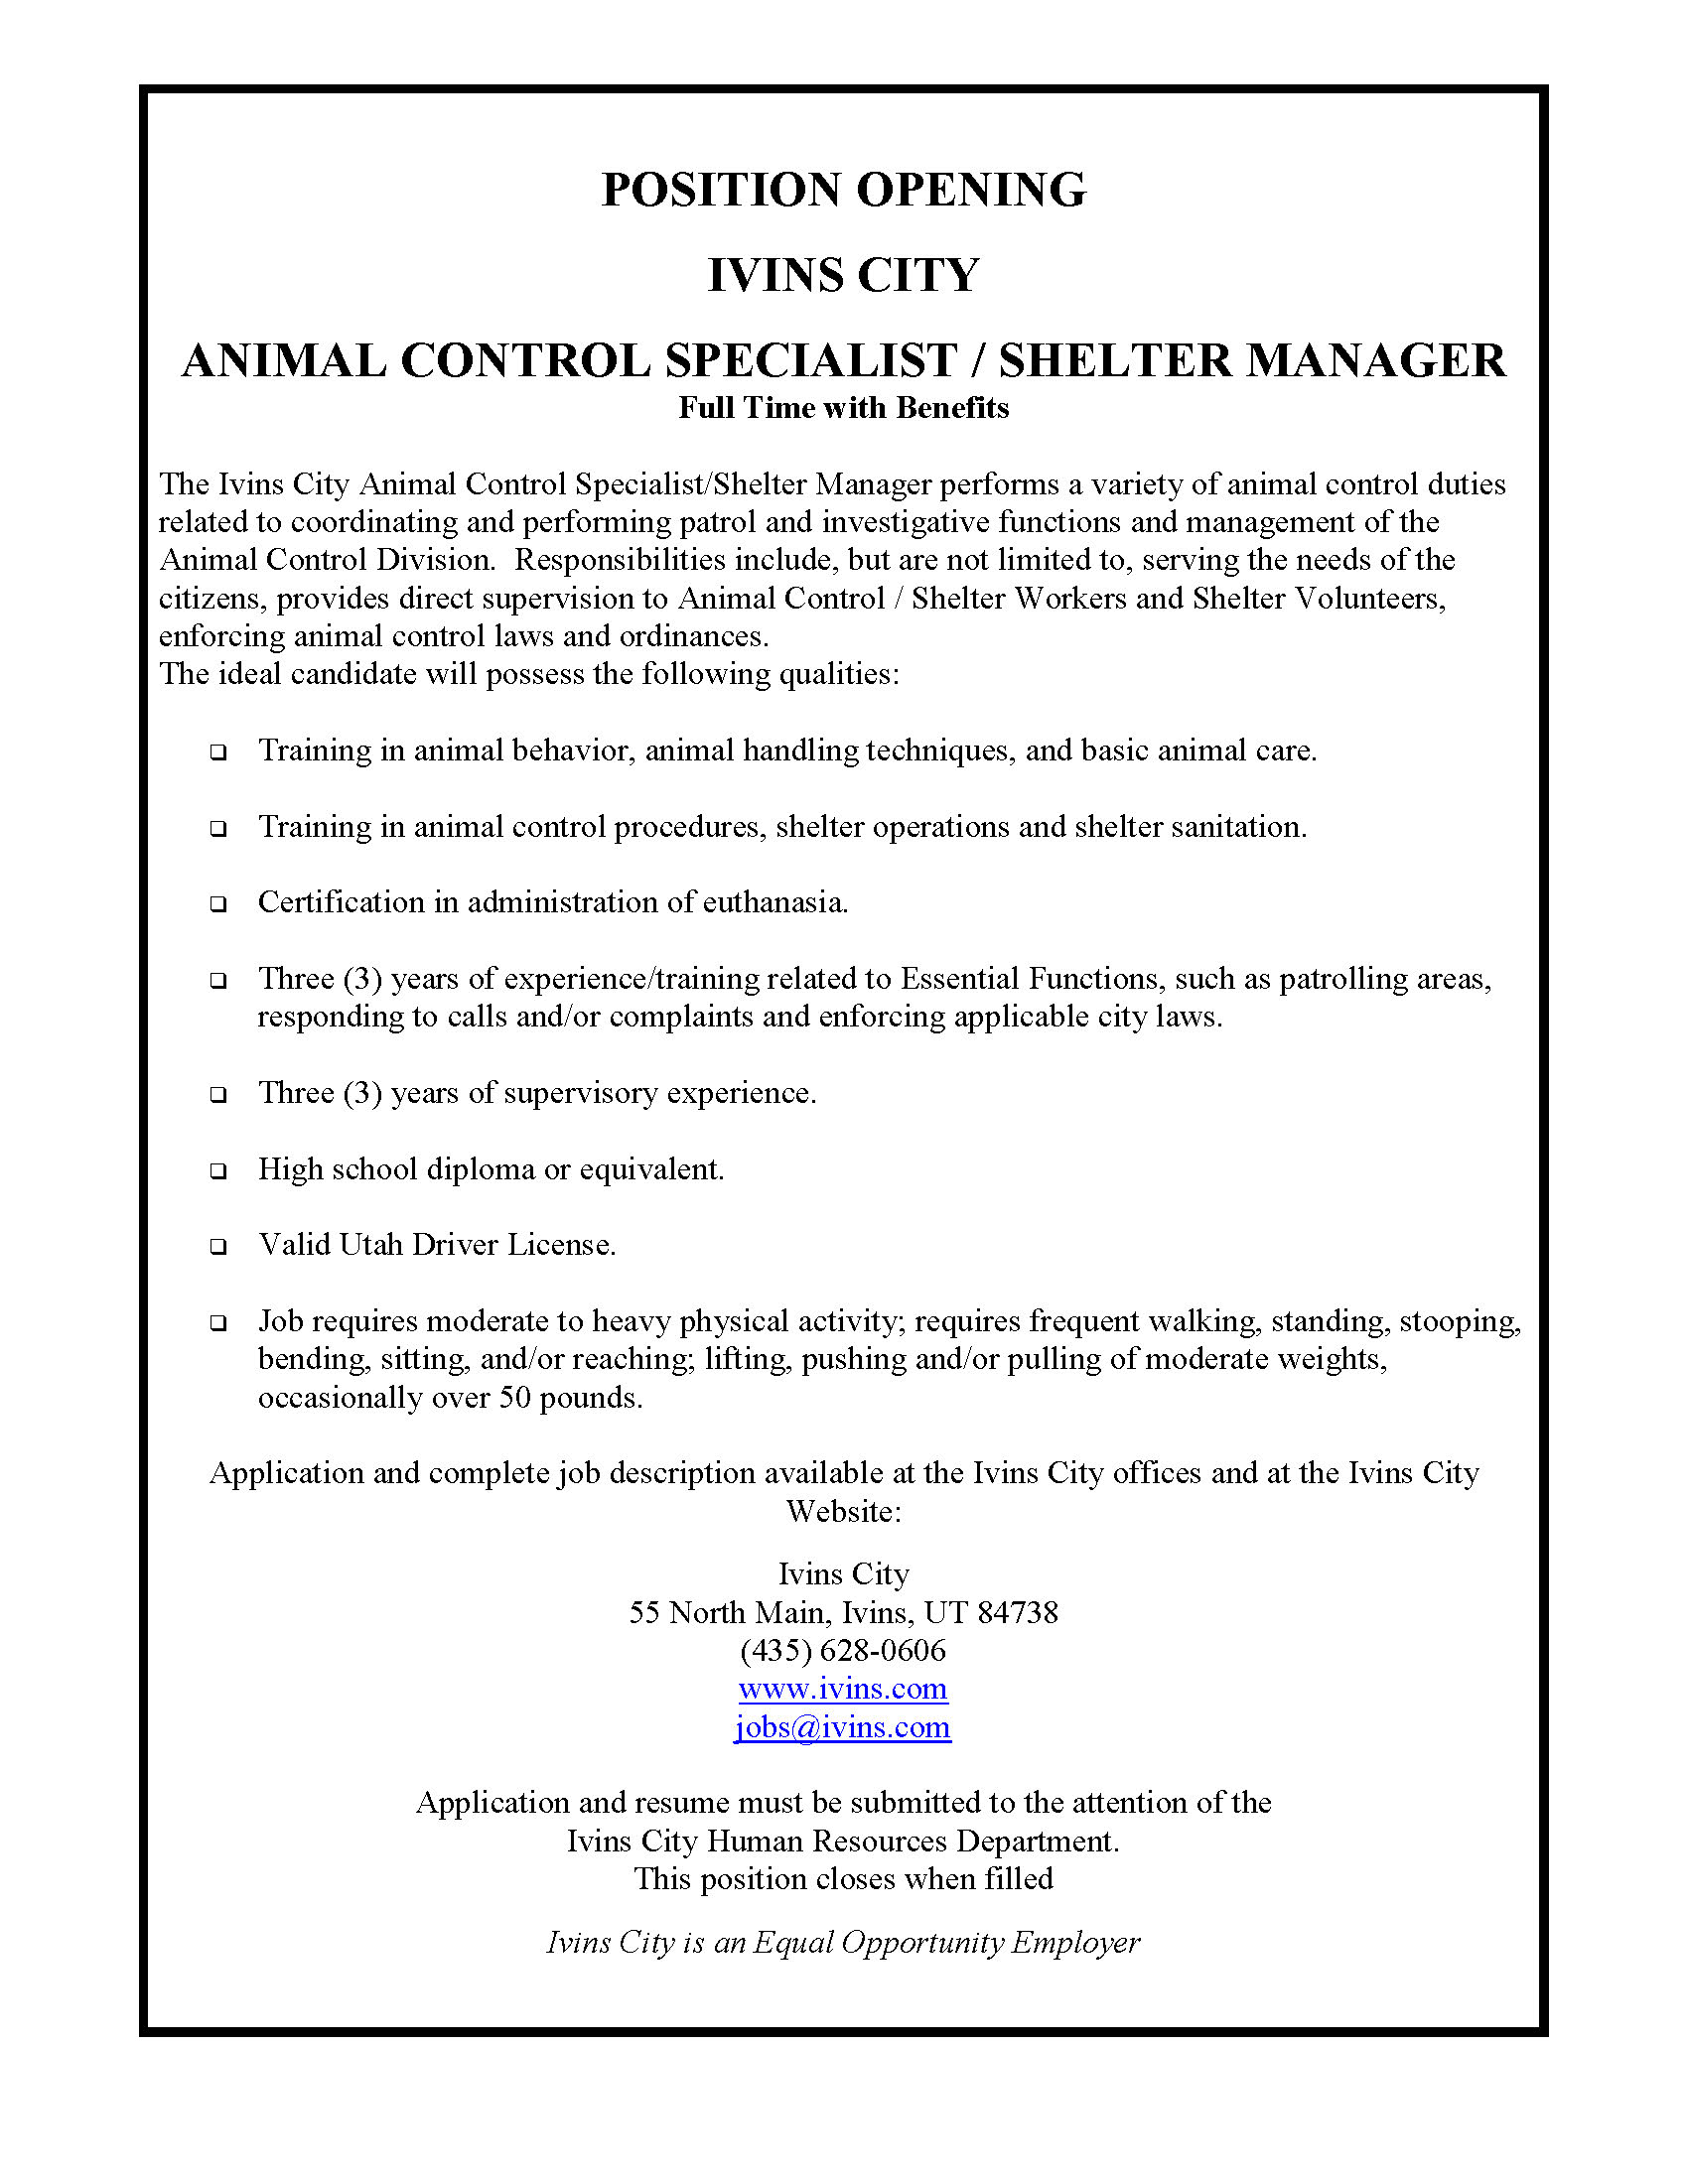 Animal Control Specialist – Shelter Manager Posting | Ivins City